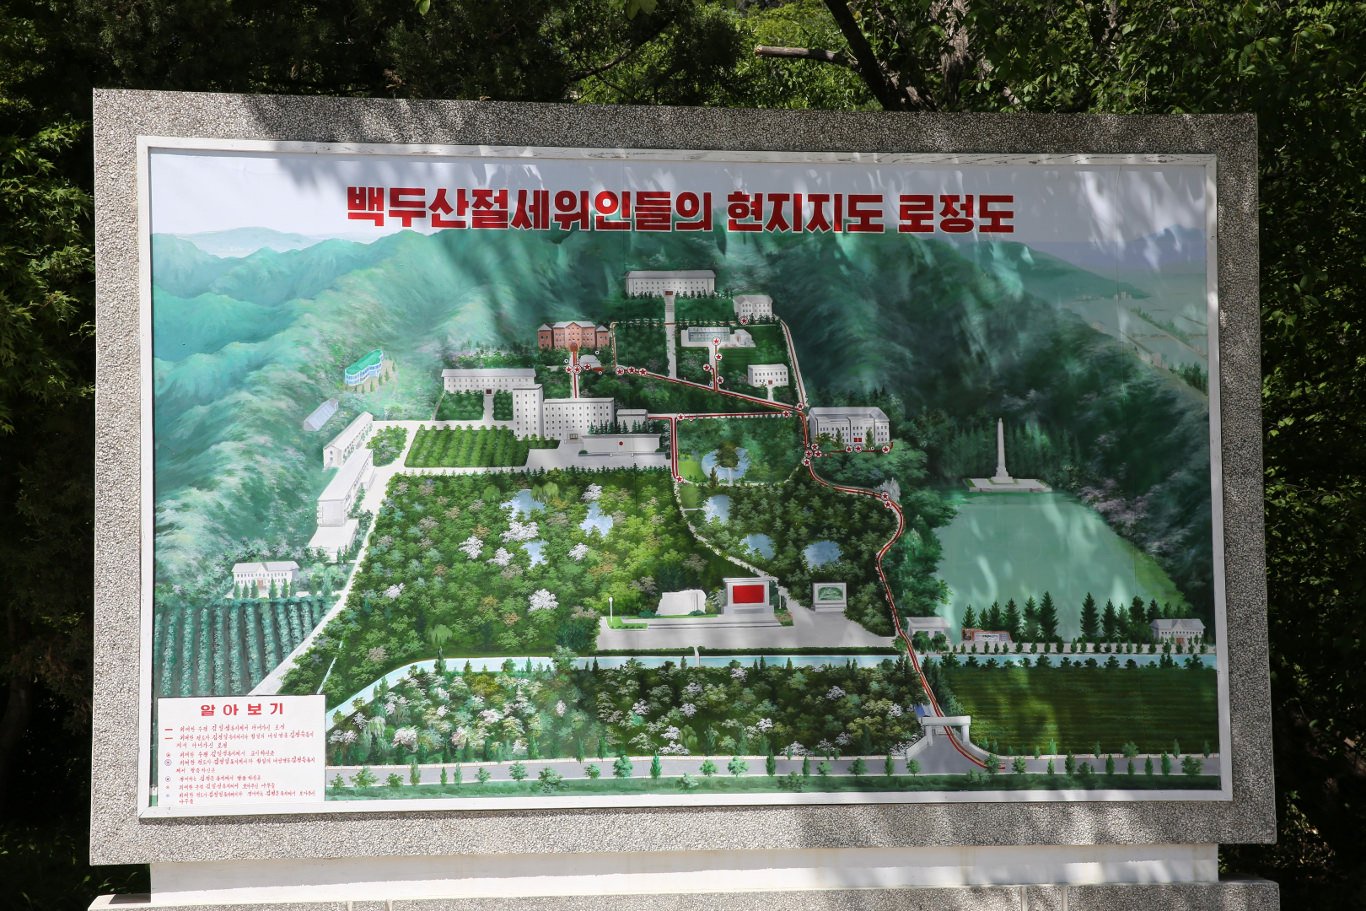 Map of the Wonsan University of Agriculture in North Korea (DPRK). Trip arranged by KTG Tours